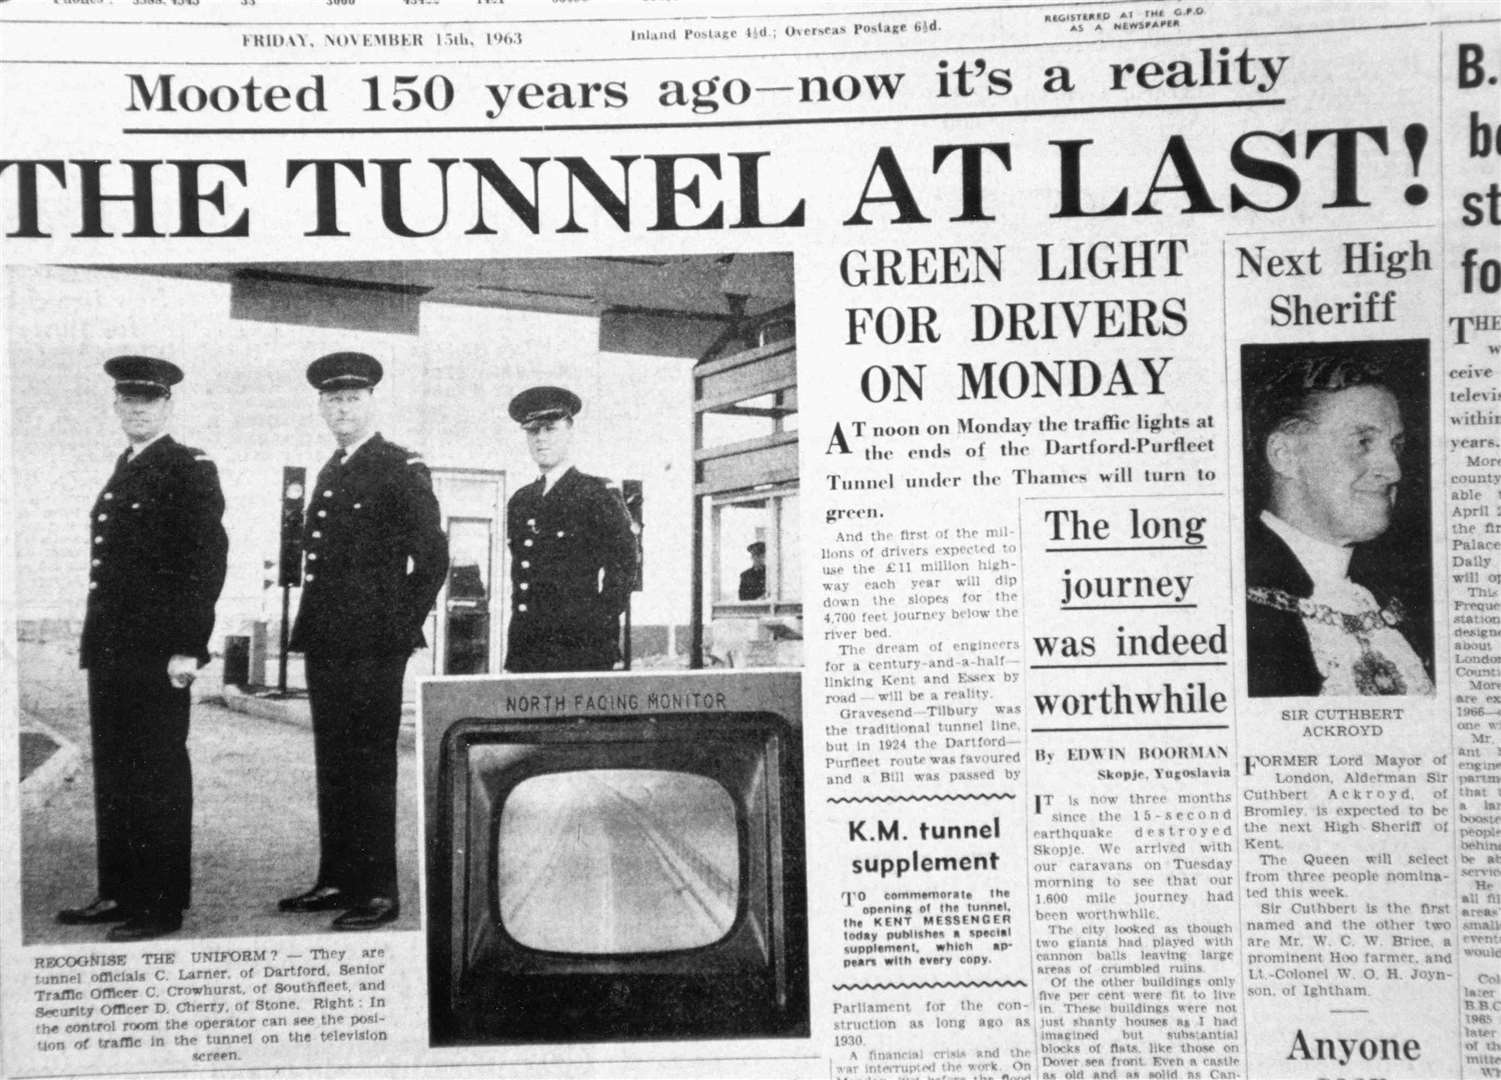 The long-awaited Dartford Tunnel finally opened in November 1963, as reported here by the Kent Messenger